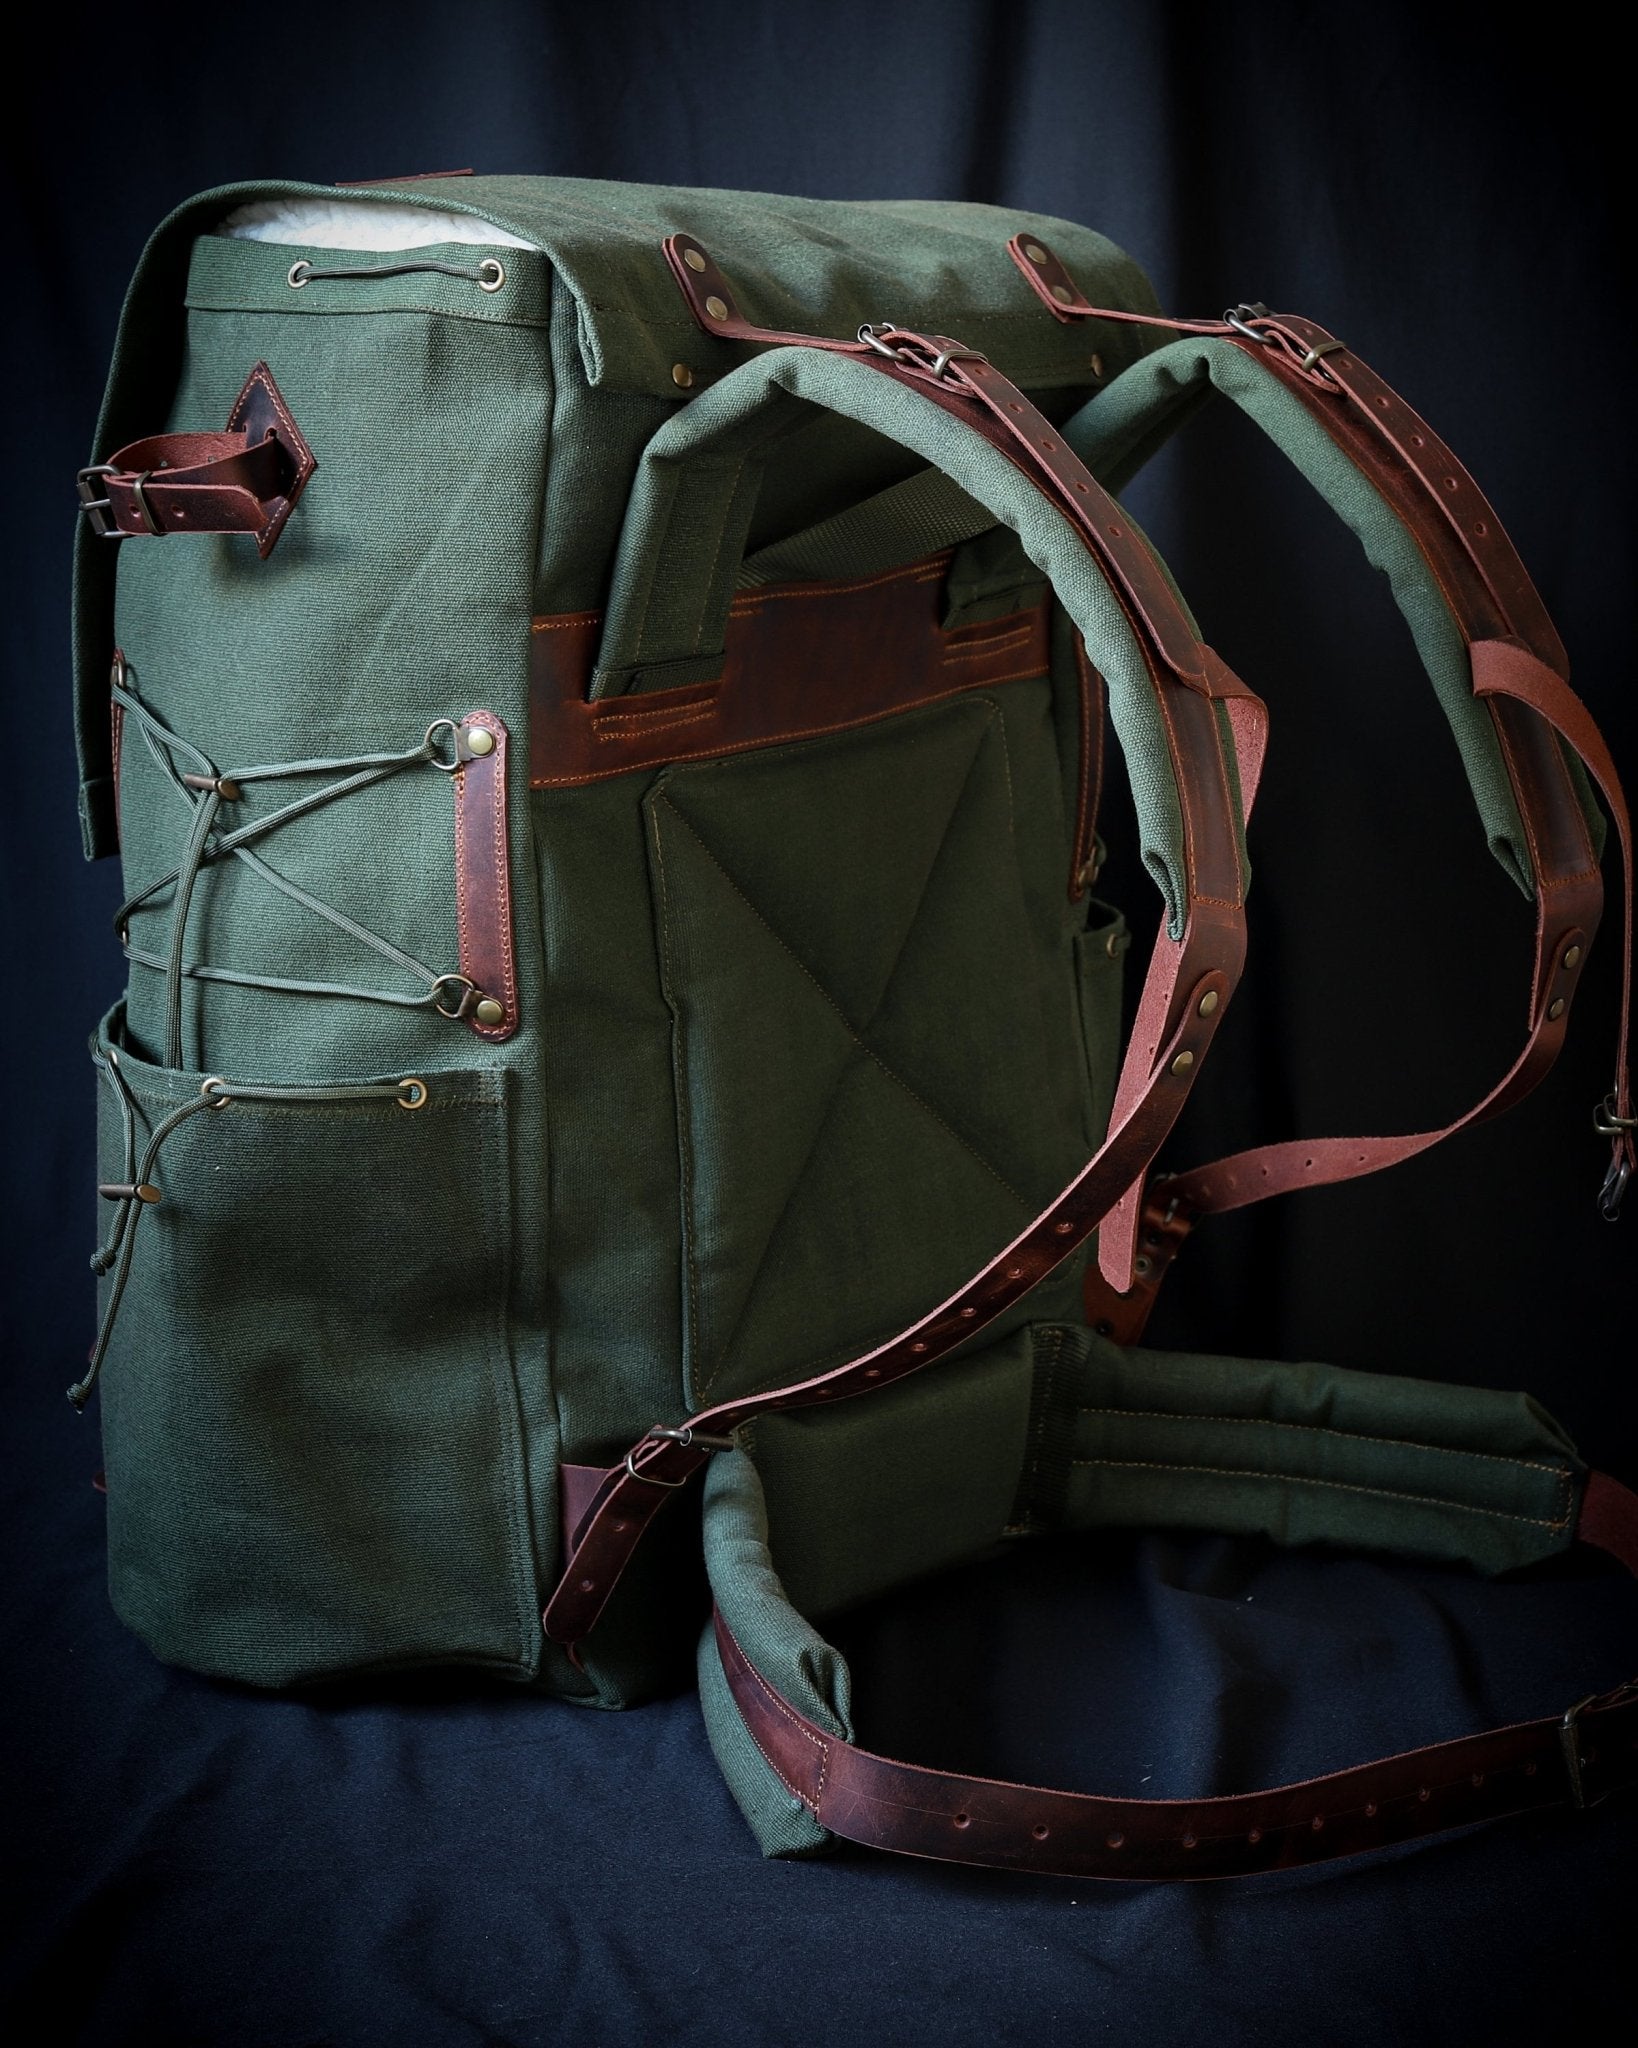 Limited Hiking Camping Backpack 30 Liter to 80 liter options Black Brown Green Options  99percenthandmade   